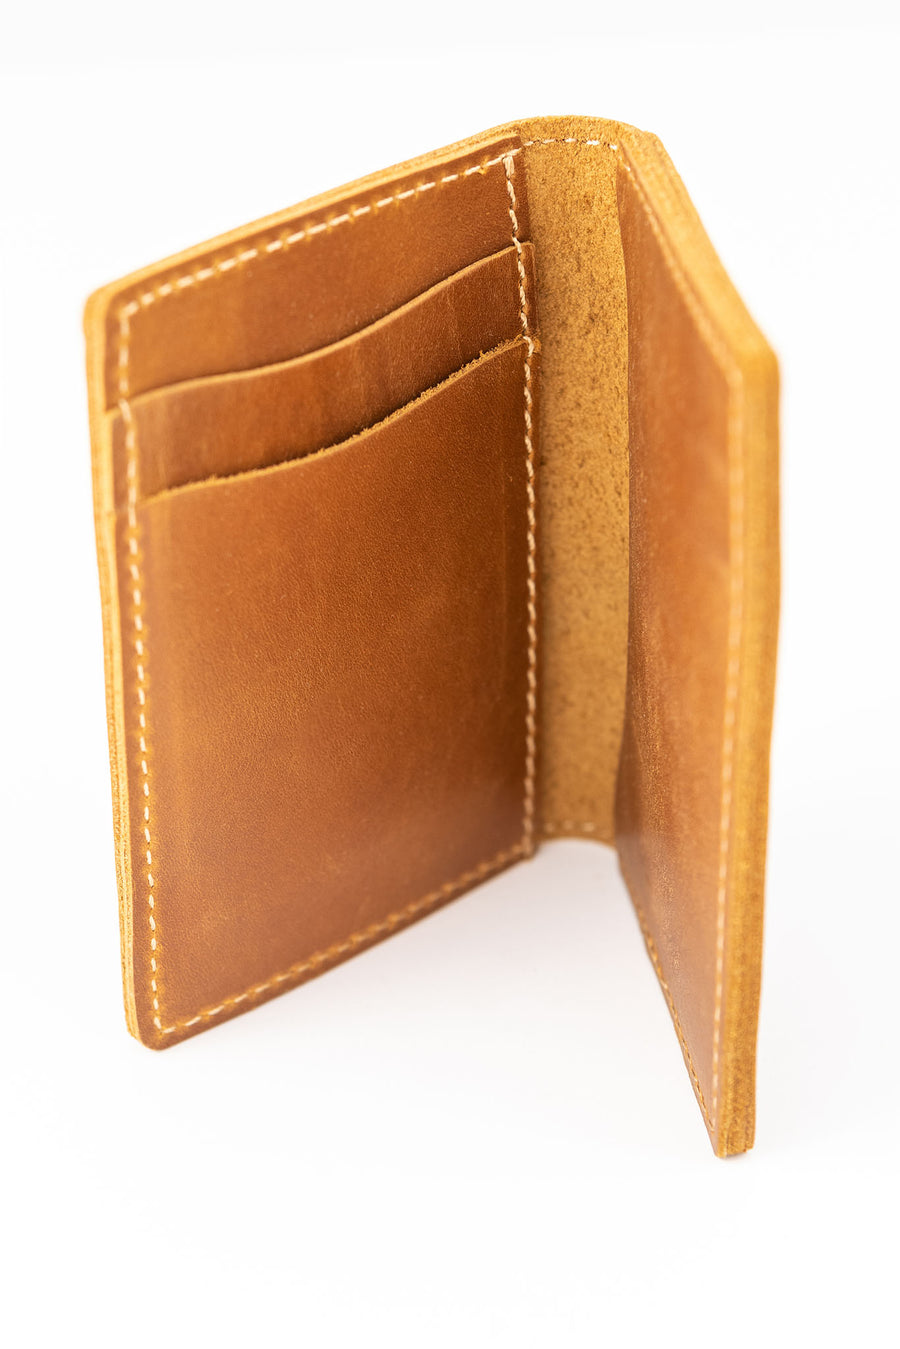 Alternate view of inside pockets of light brown colored slim bifold leather wallet